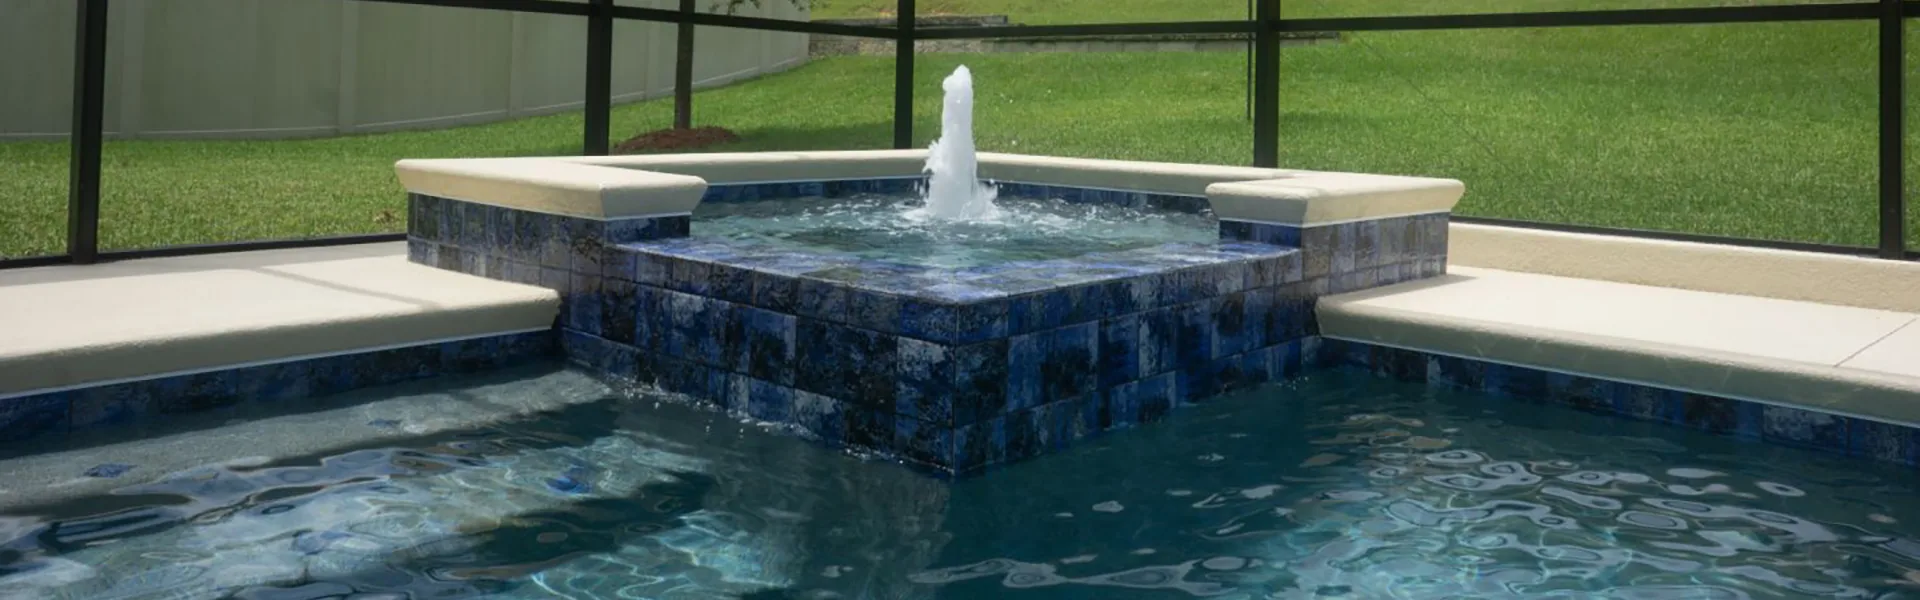 Pool and Hot Tub Combo Design